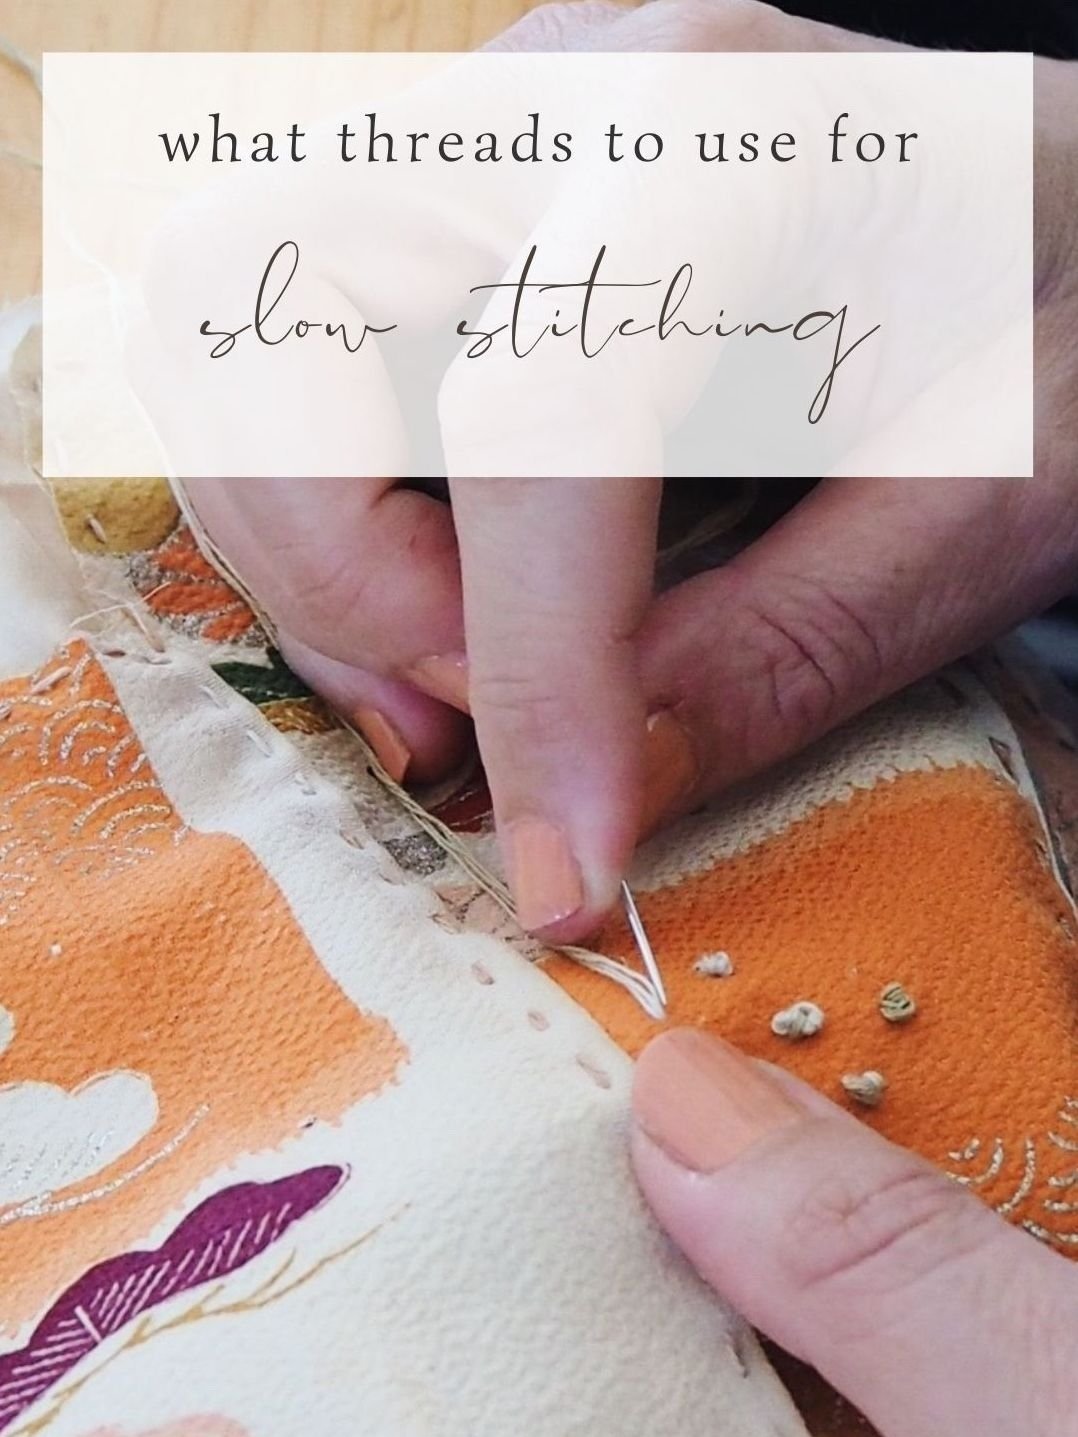 3 Ways to Use Your Slow Stitching Pieces